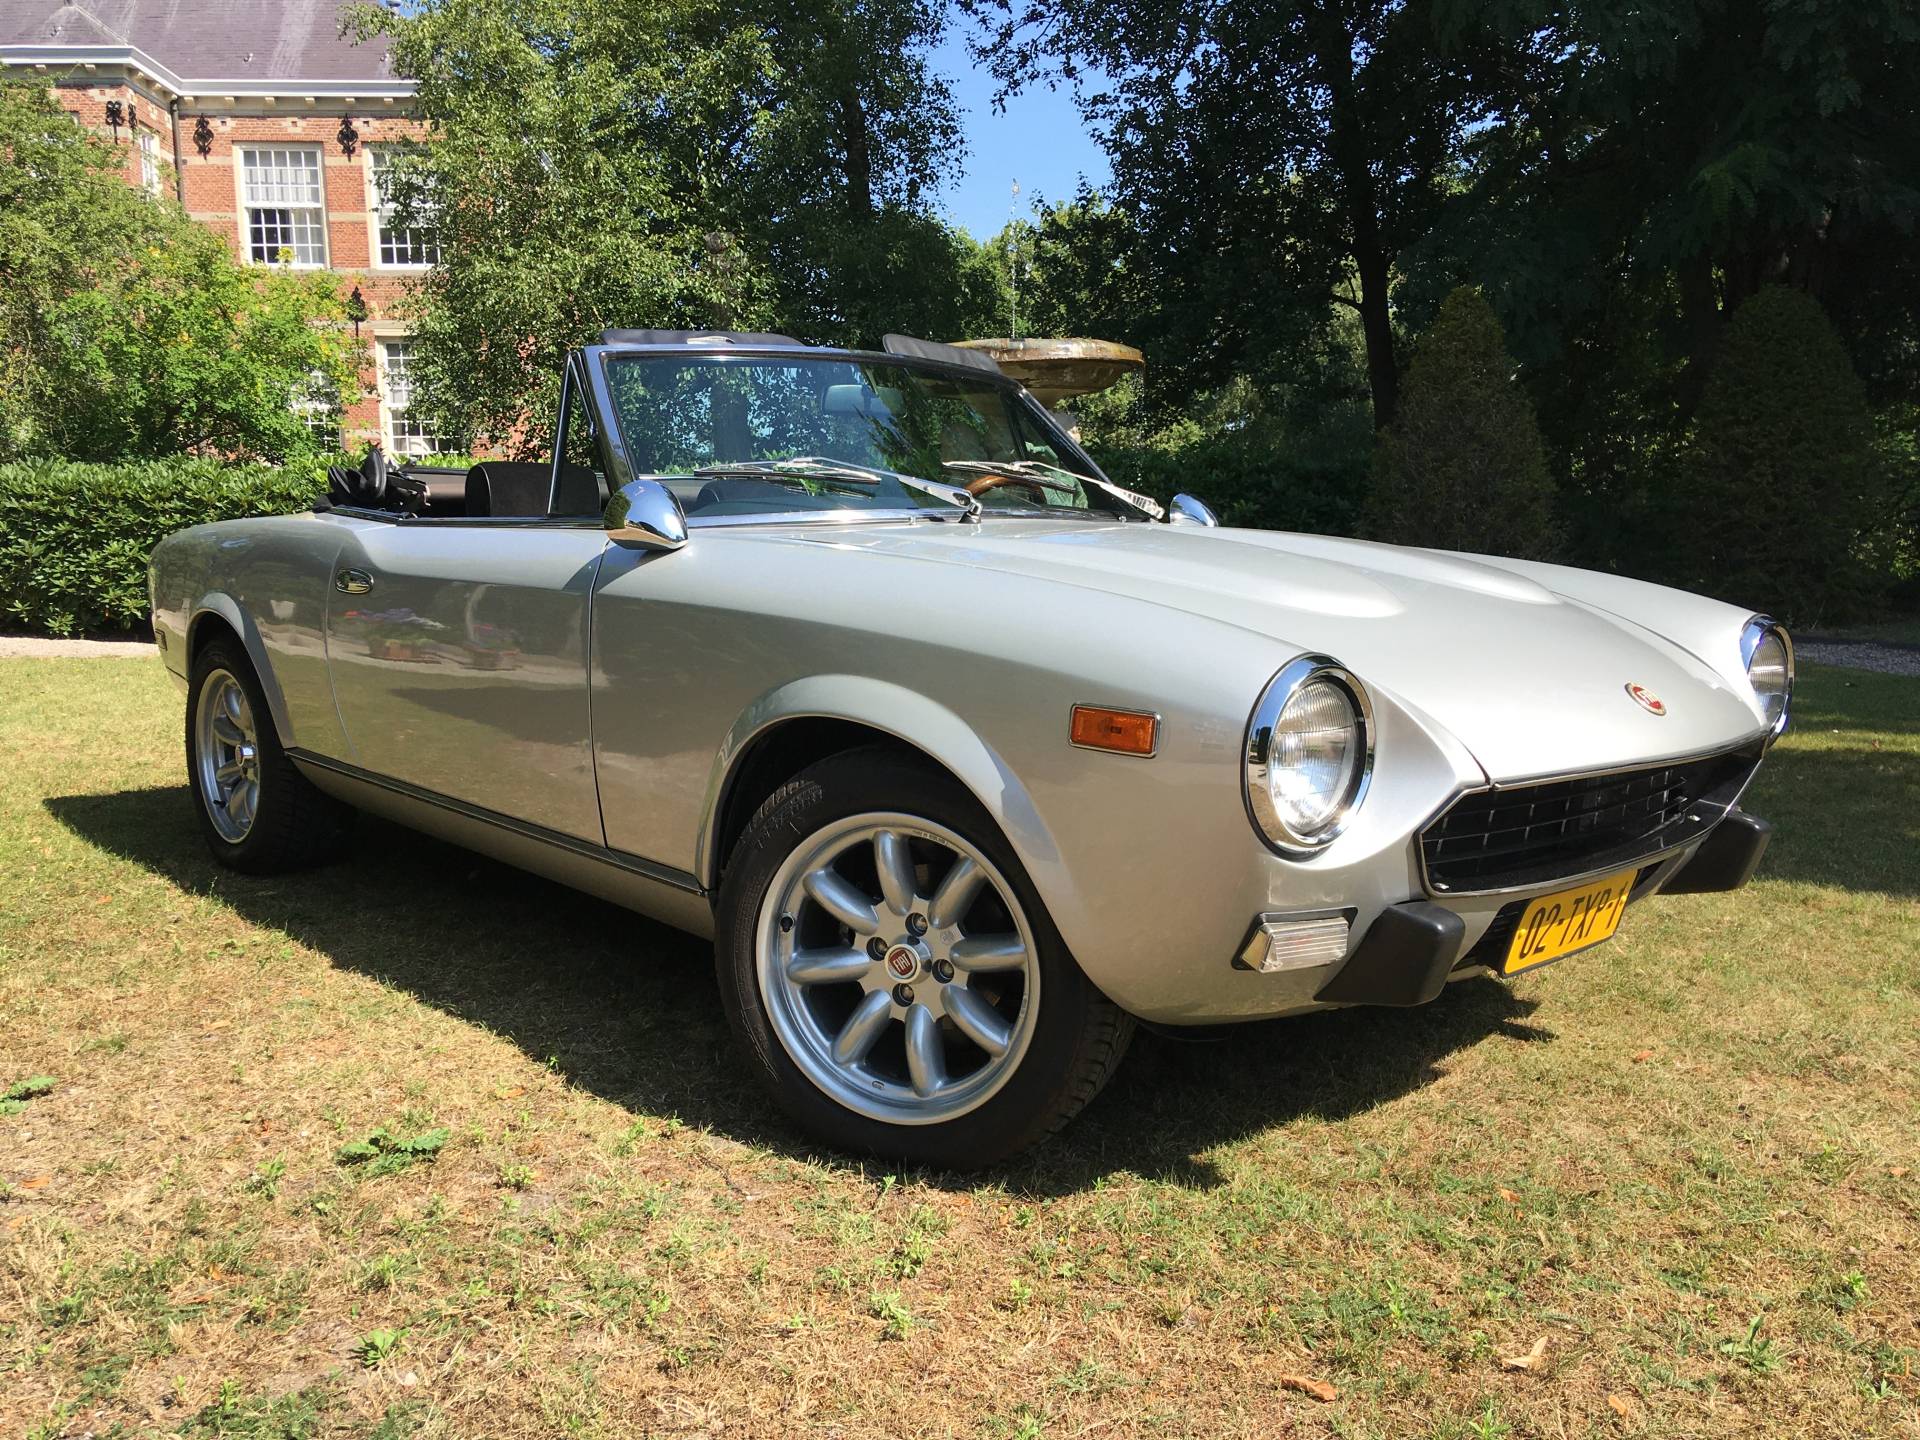 For Sale: Fiat Spider 2000 (1980) Offered For £19,236